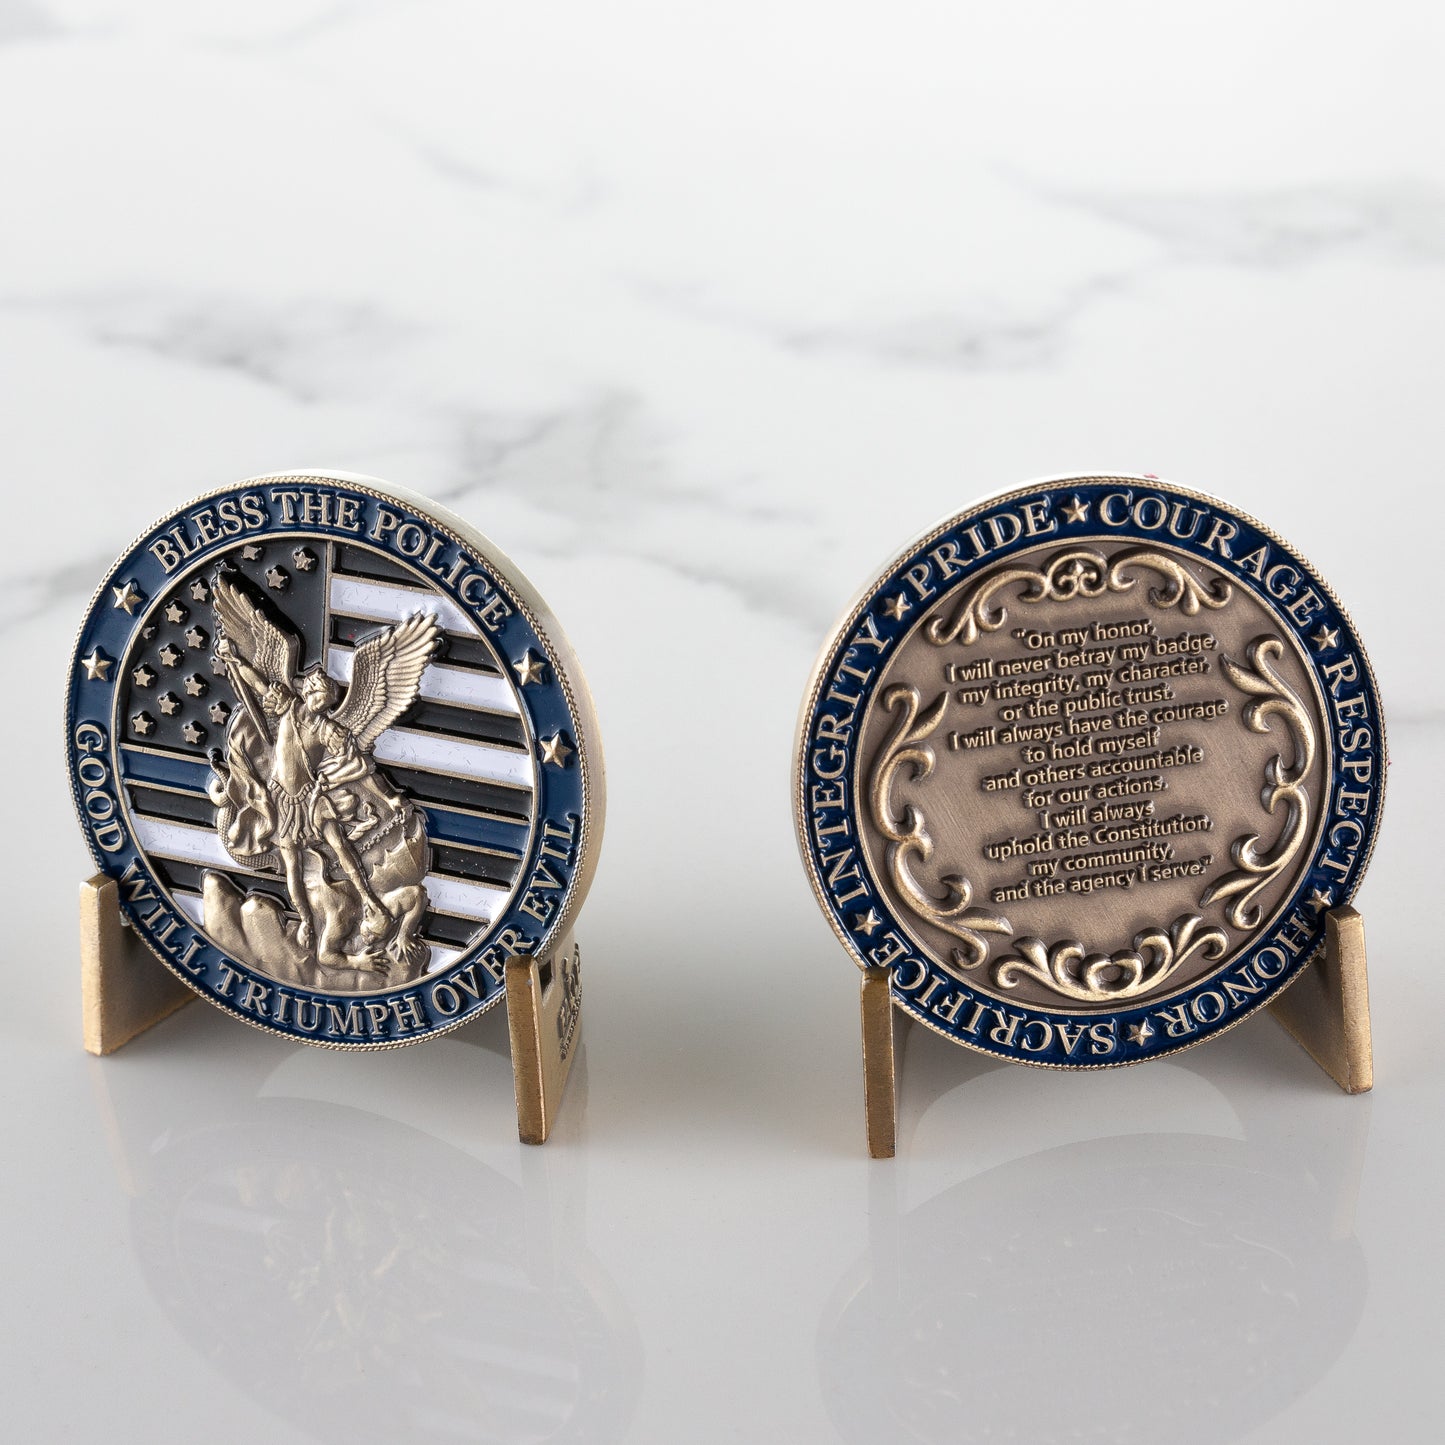 Saint Michael Bless The Police Coin